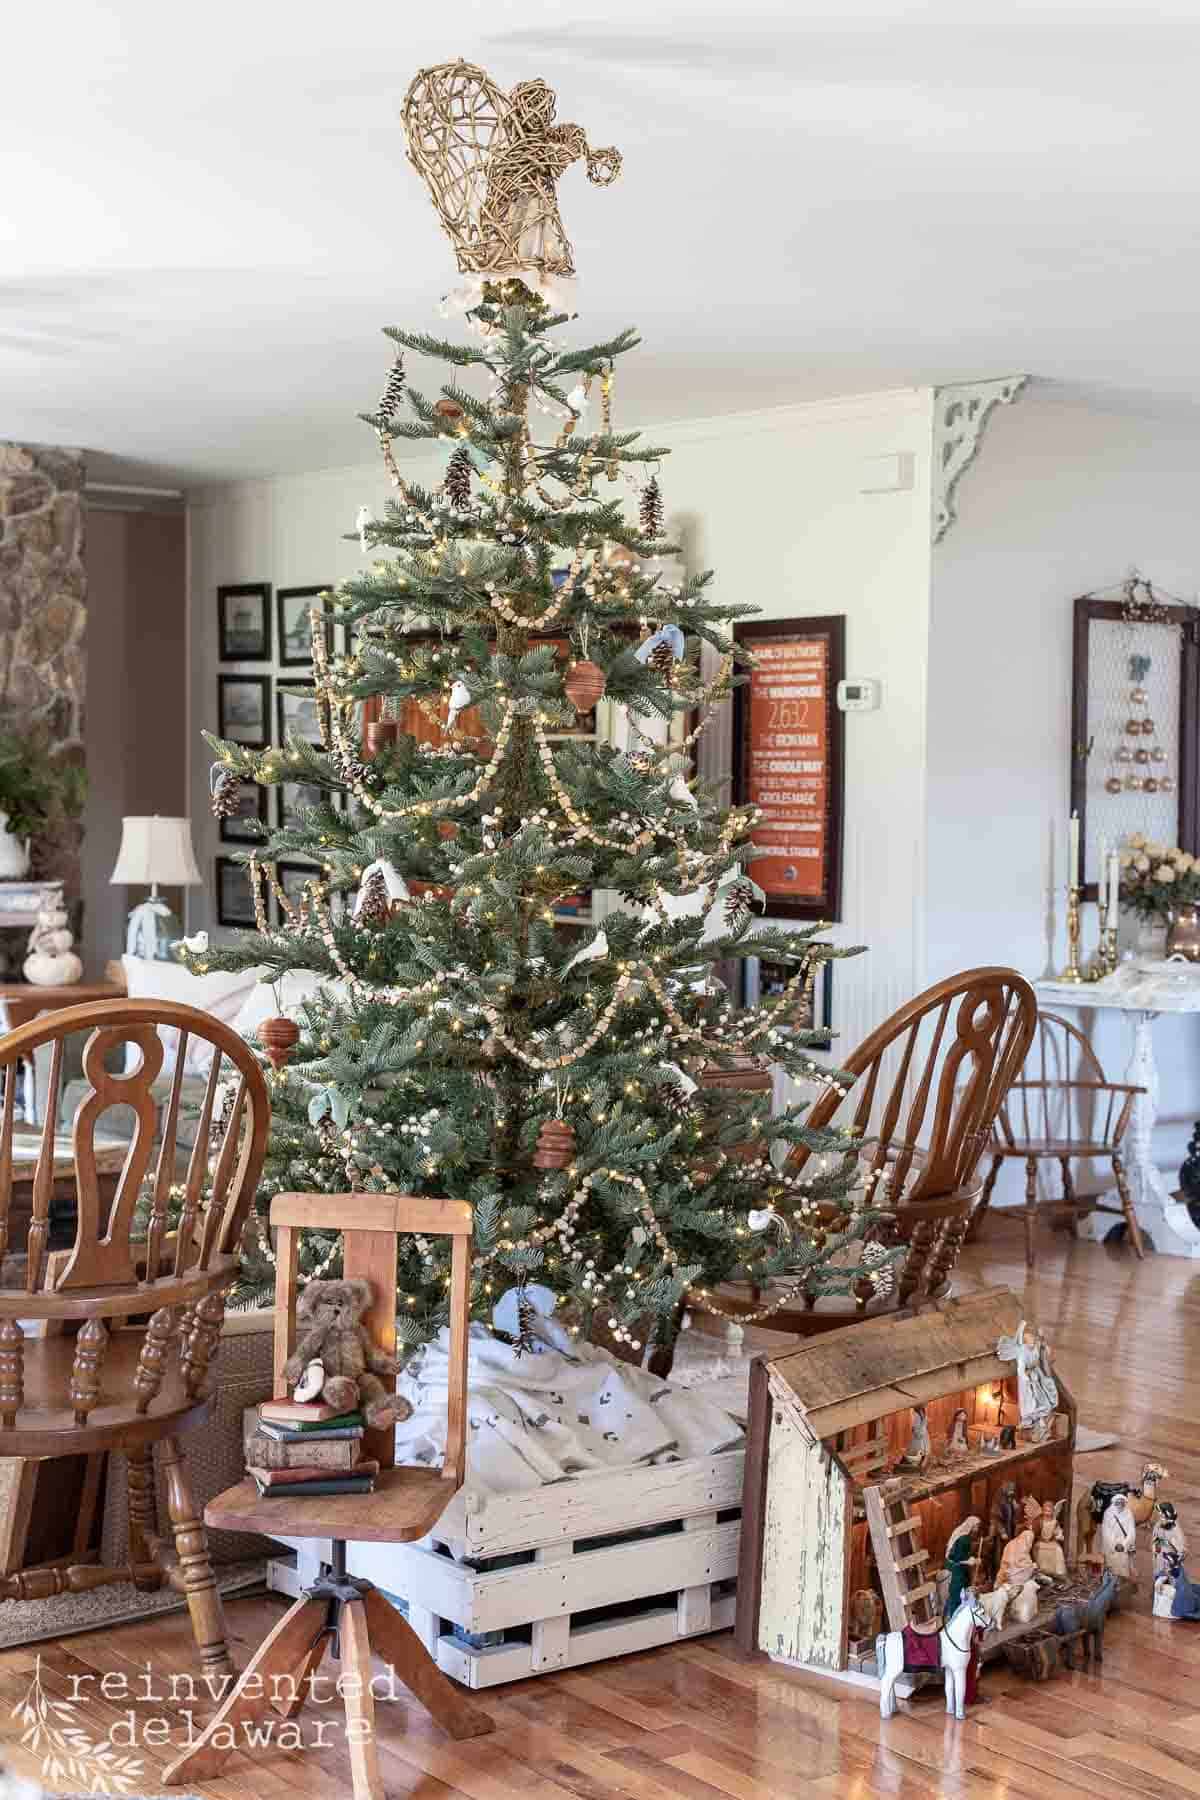 Christmas tree decorated with simple rustic ornaments